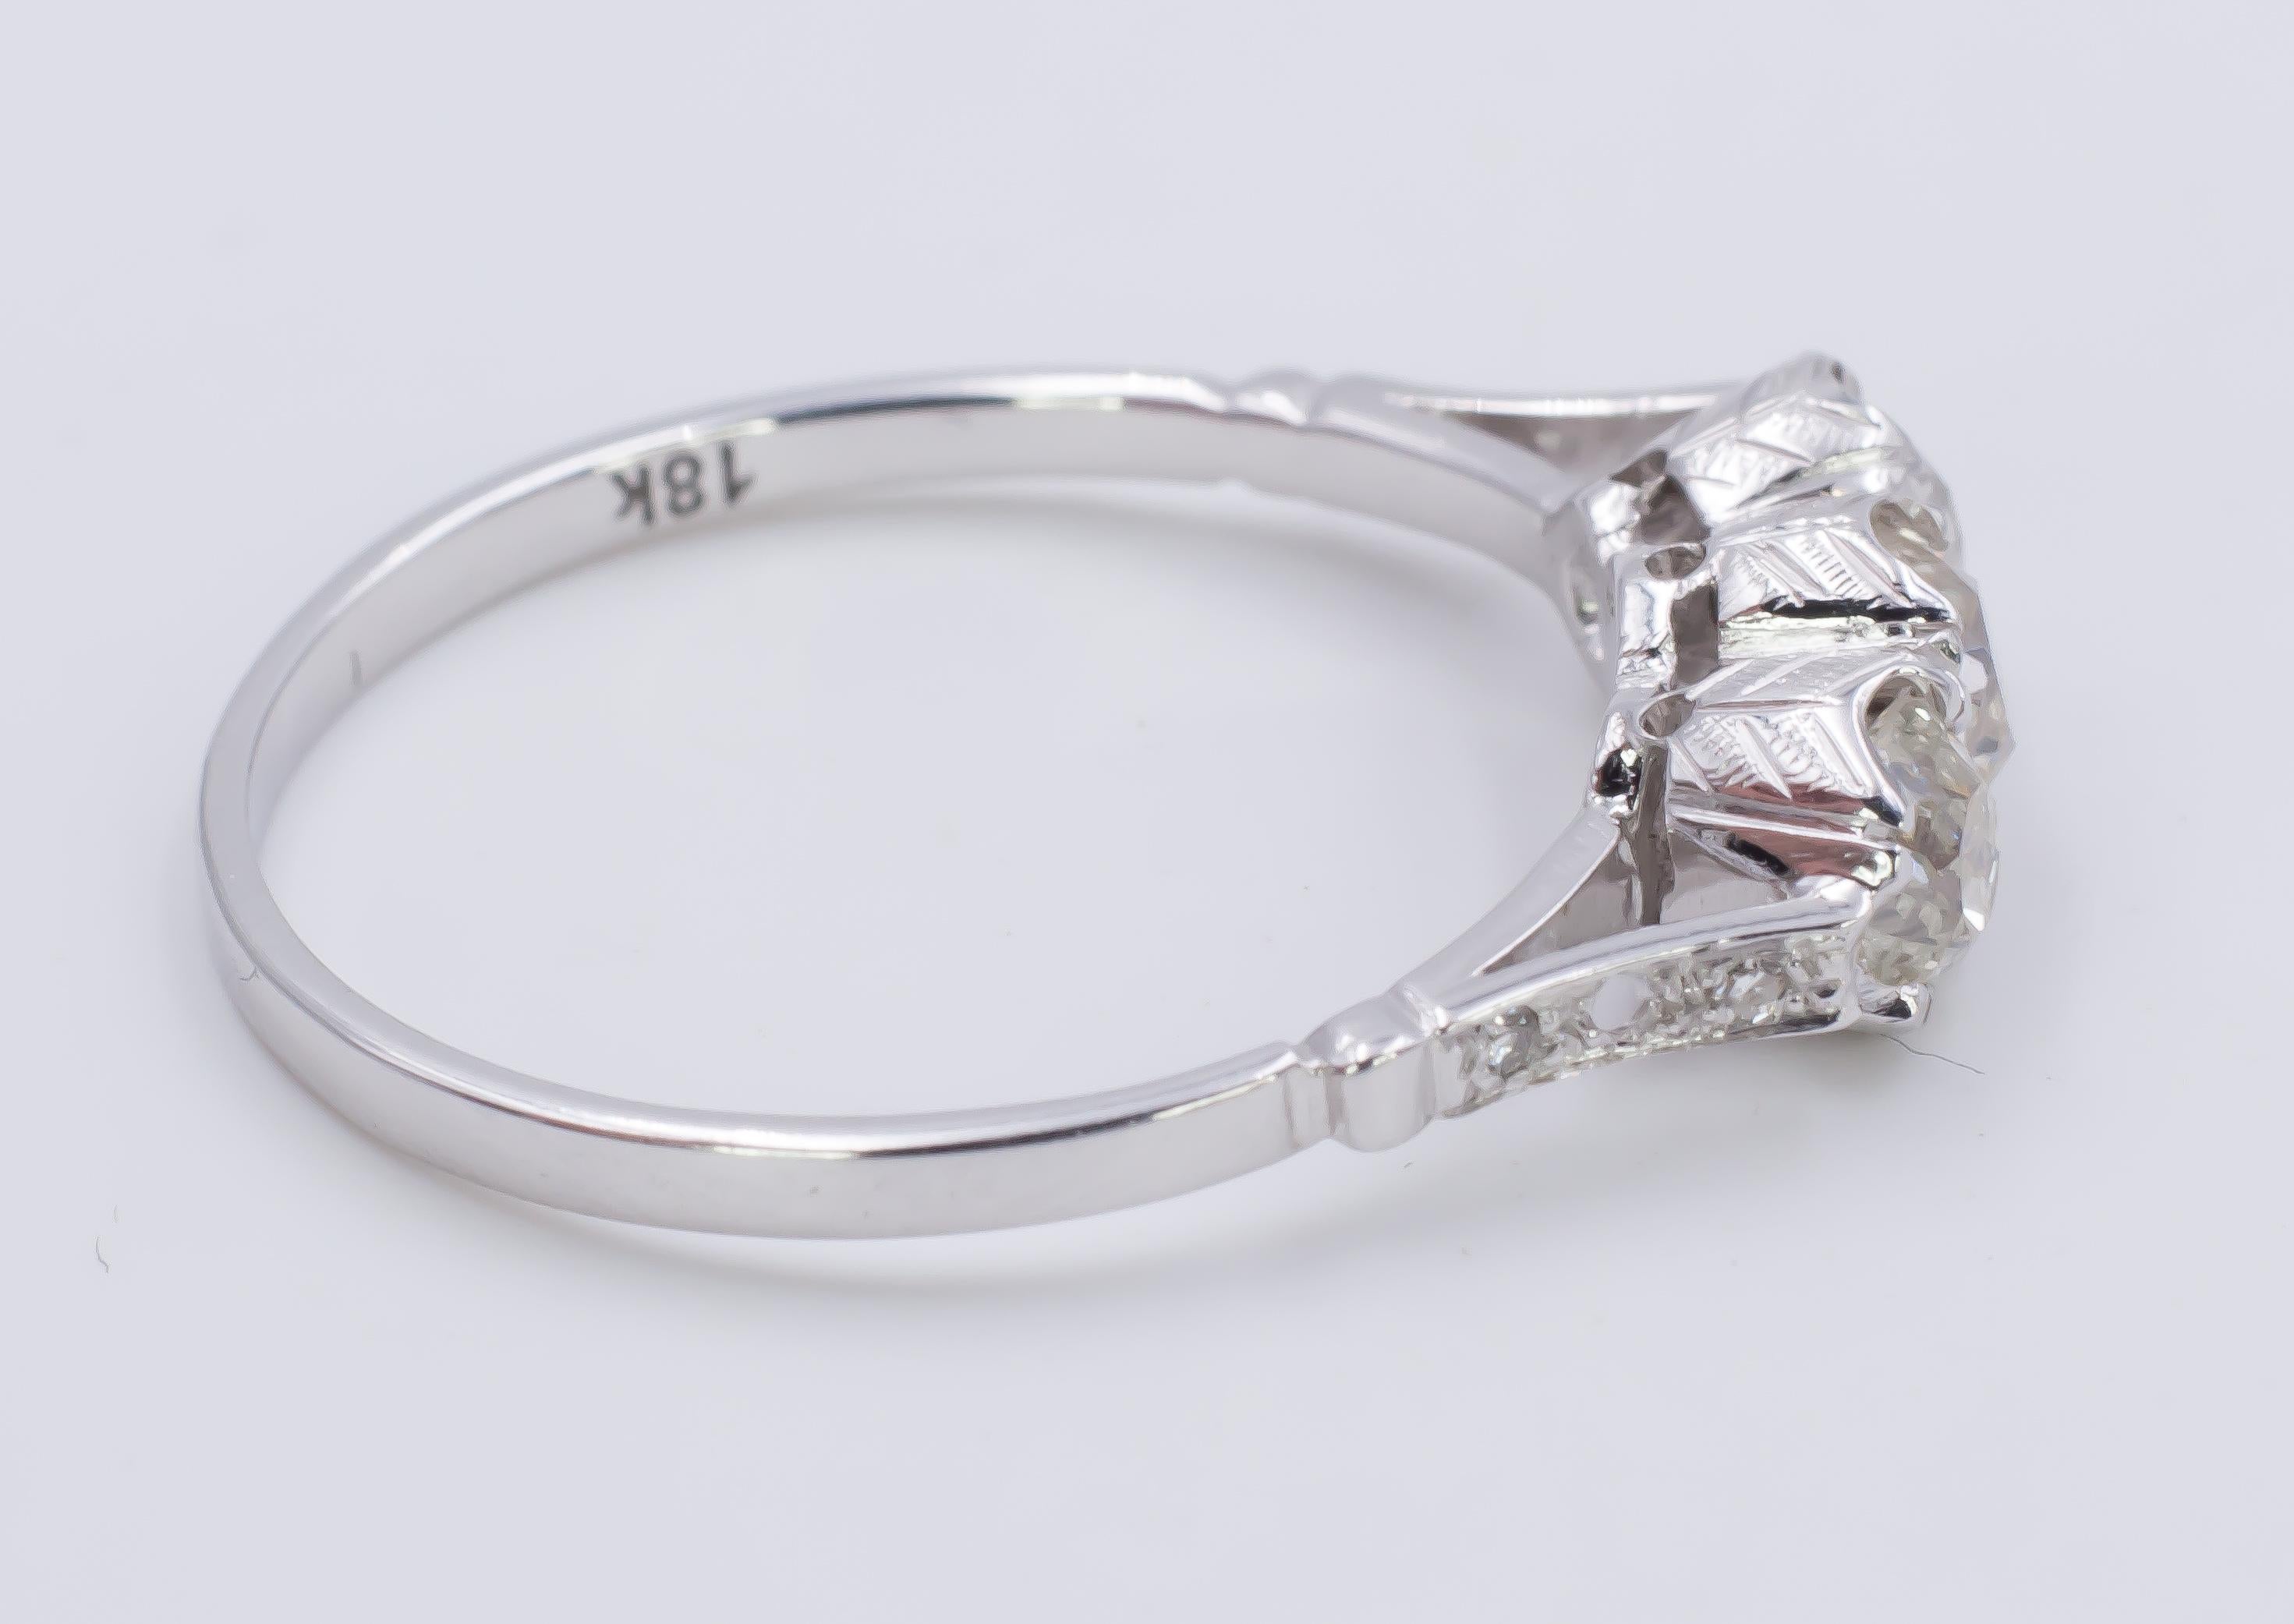 This stunning trilogy ring is crafted in 18K white gold throughout, and is set with three old mine cut diamonds, totalling 1.09ct. The shoulders are decorated as well with diamonds, while the gallery claw shows a beautiful carved setting. 
The ring